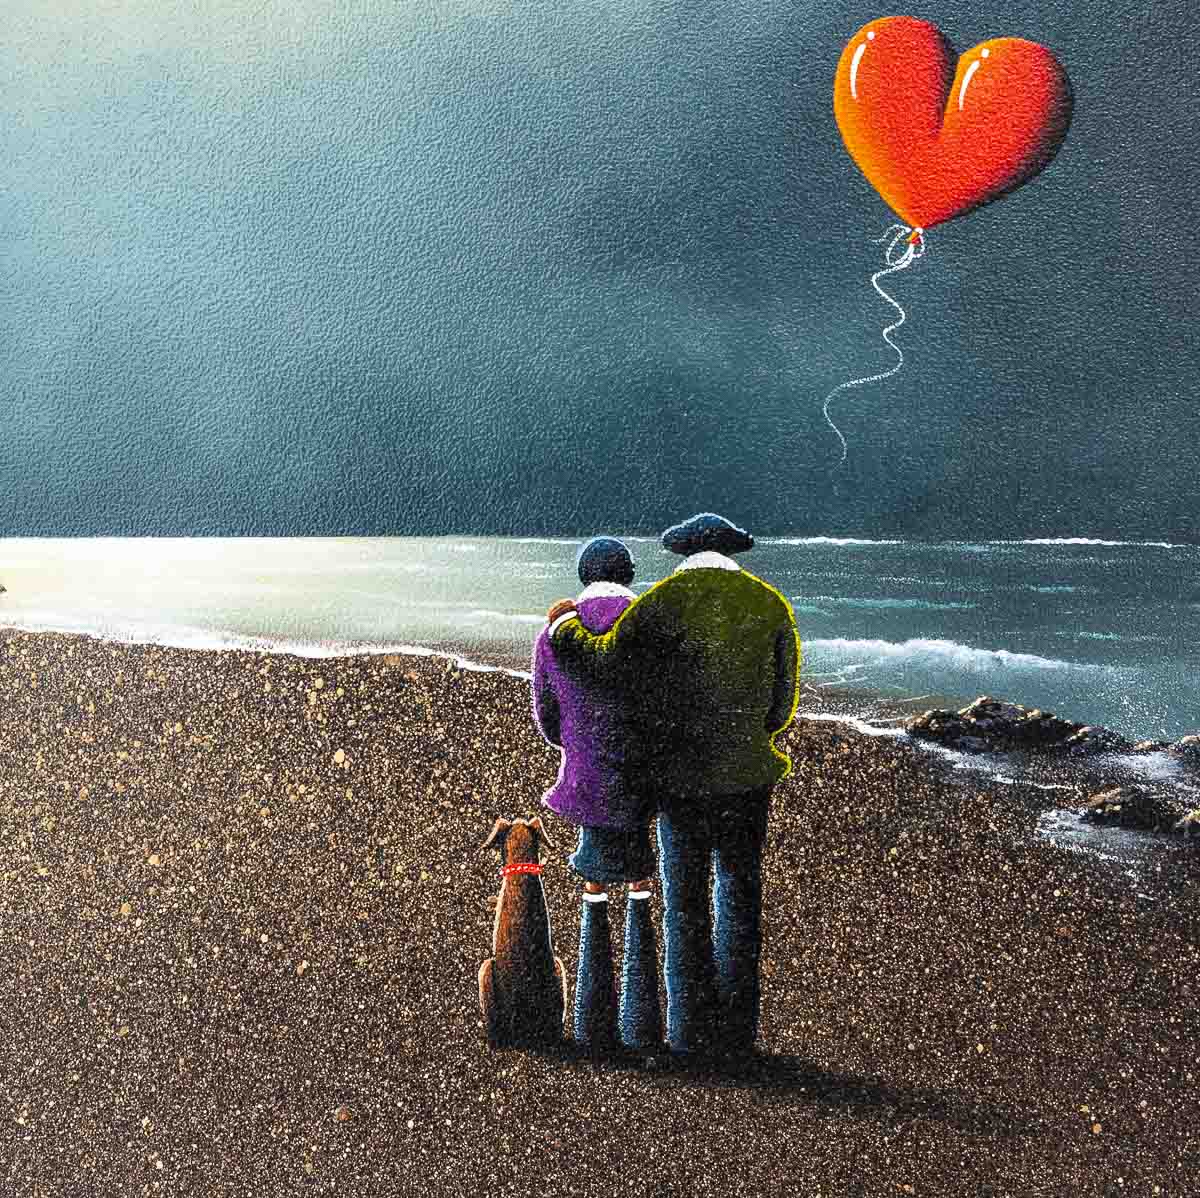 I&#39;ll Always Be By Your Side - Original - HOLD BACK FOR DR SHOW David Renshaw Original